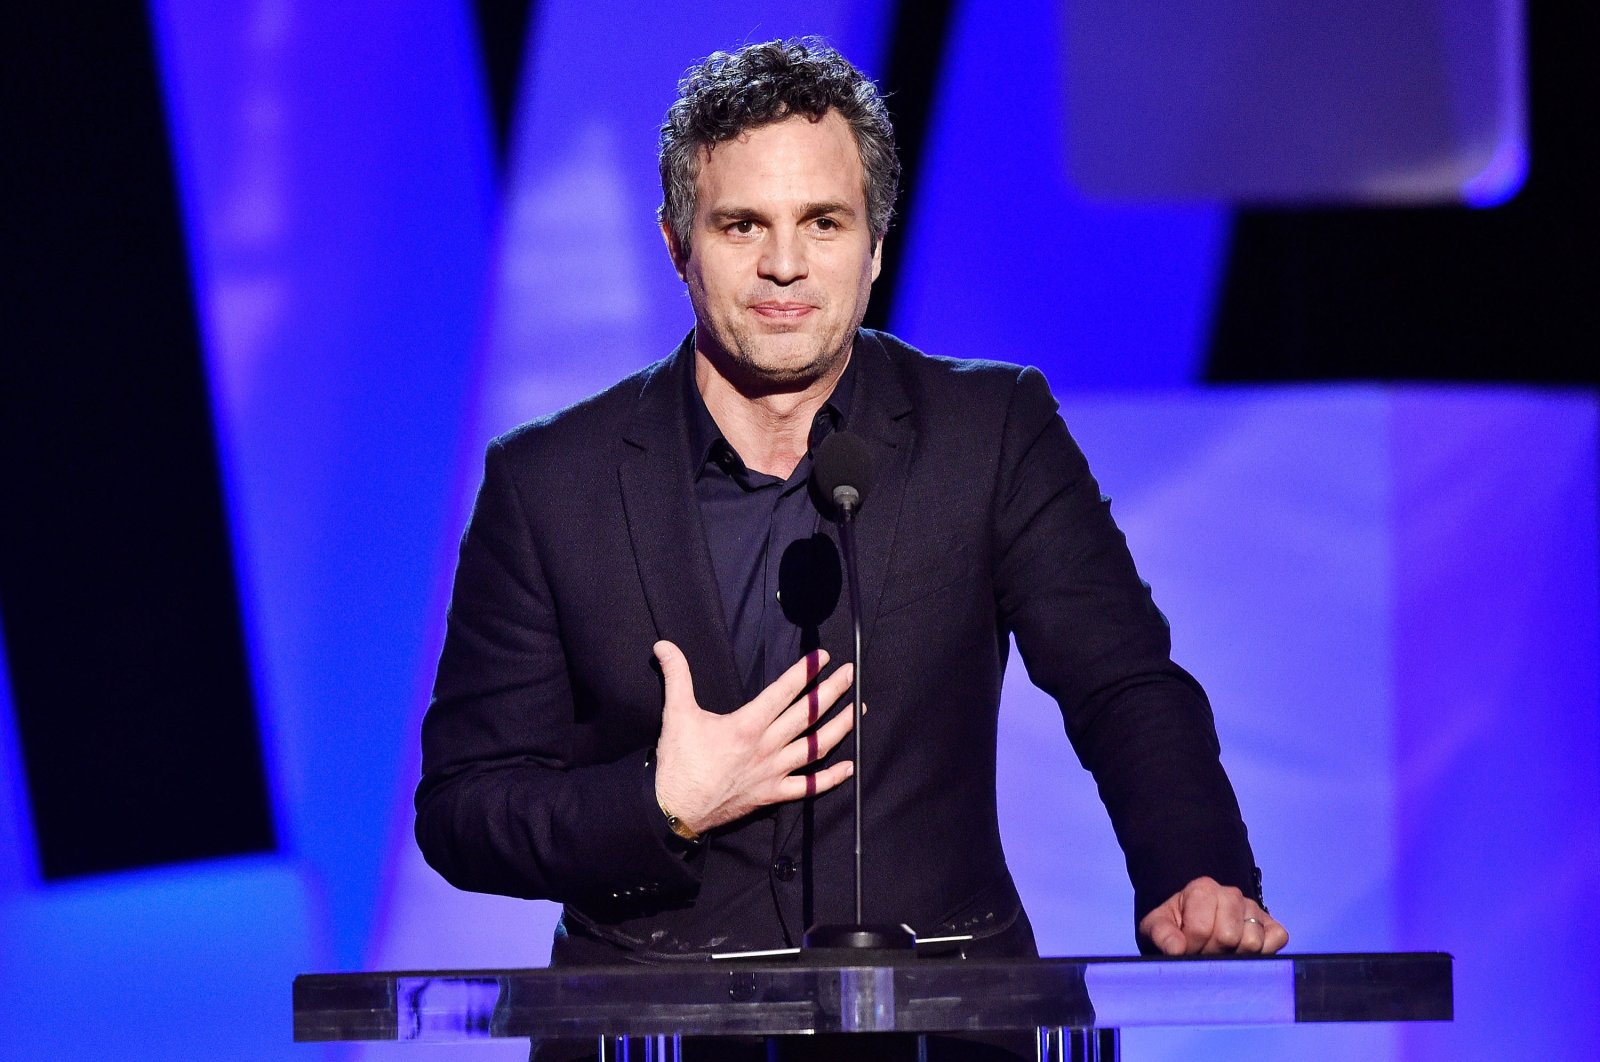 Actor Mark Ruffalo accepts the Robert Altman Award for "Spotlight" onstage during the 2016 Film Independent Spirit Awards in Santa Monica, California, U.S., Feb. 27, 2016. (Getty Images)